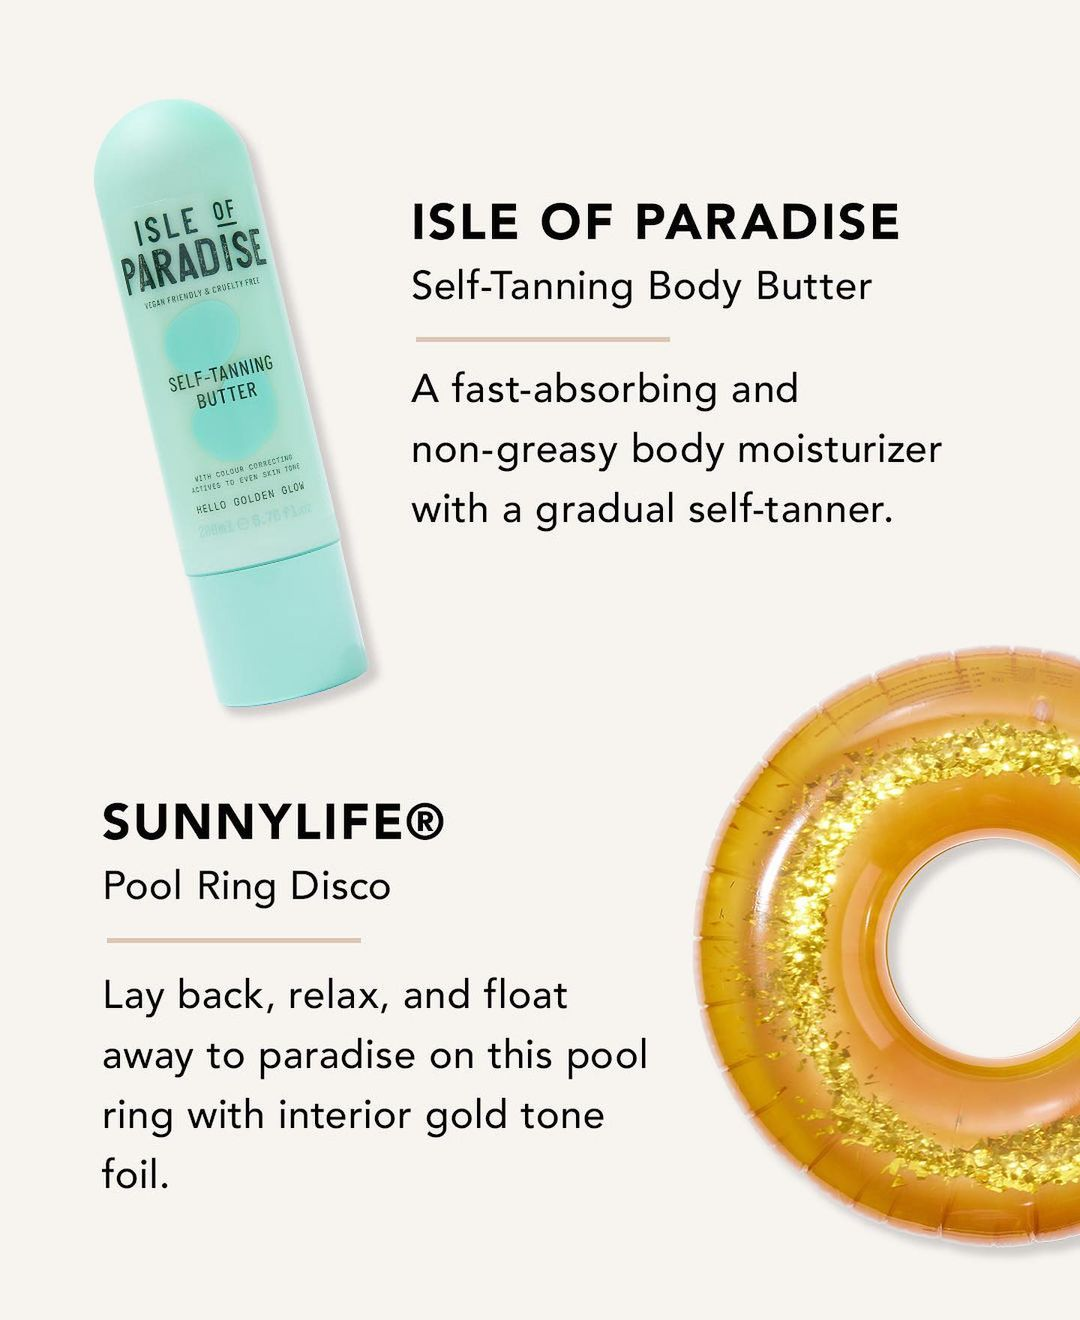 Isle of Paradise Self-Tanning Butter and Sunnylife Pool Ring Disco